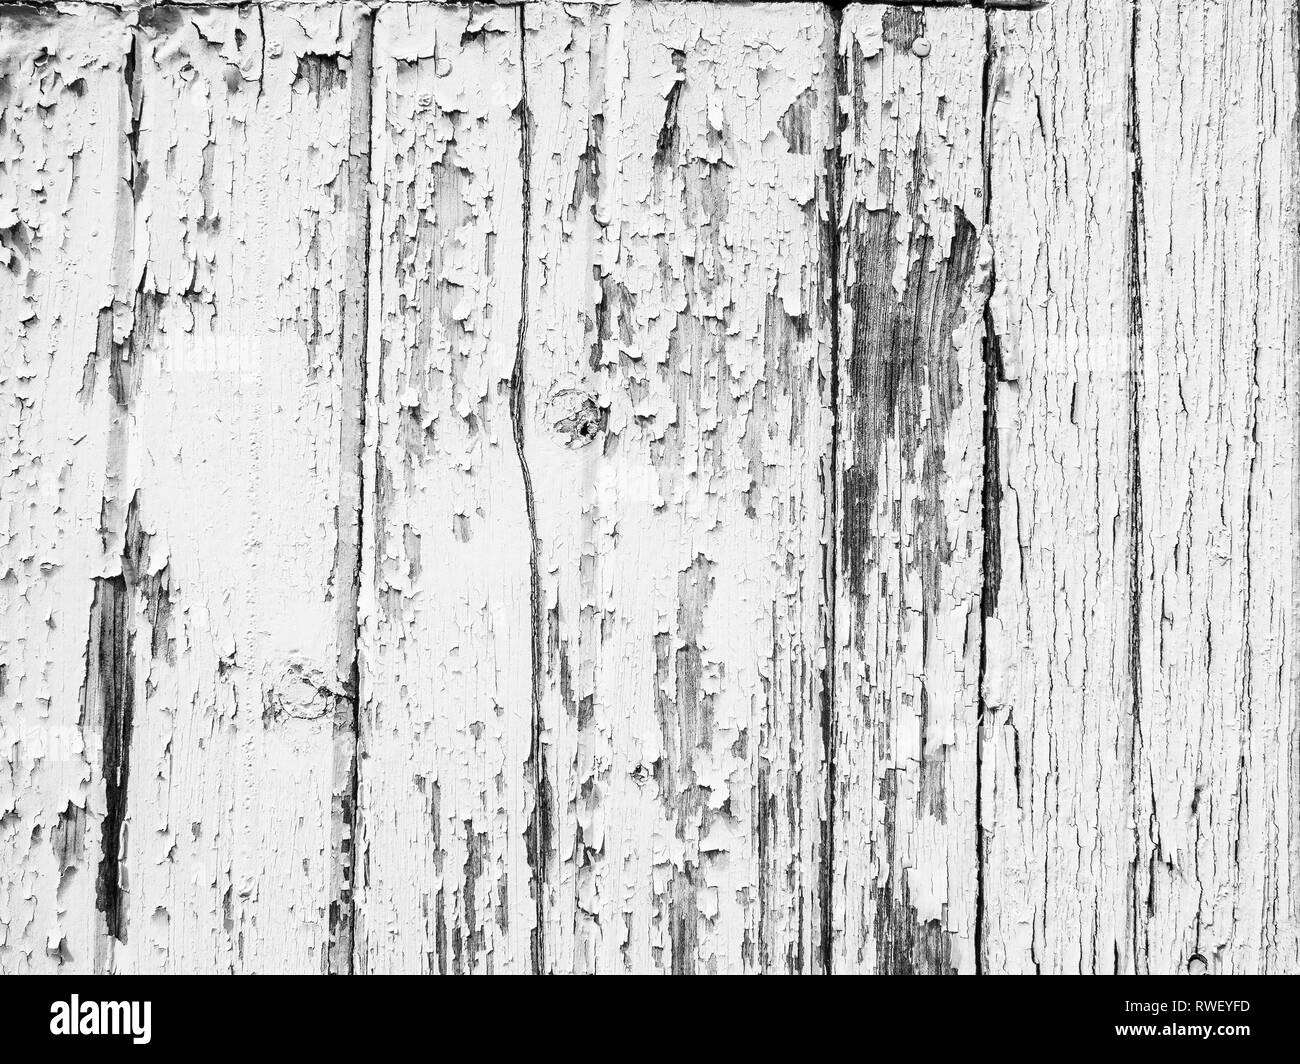 Peeling paint flakes on a white wooden wall high resolution background digital wallpaper abstract weathered texture Stock Photo